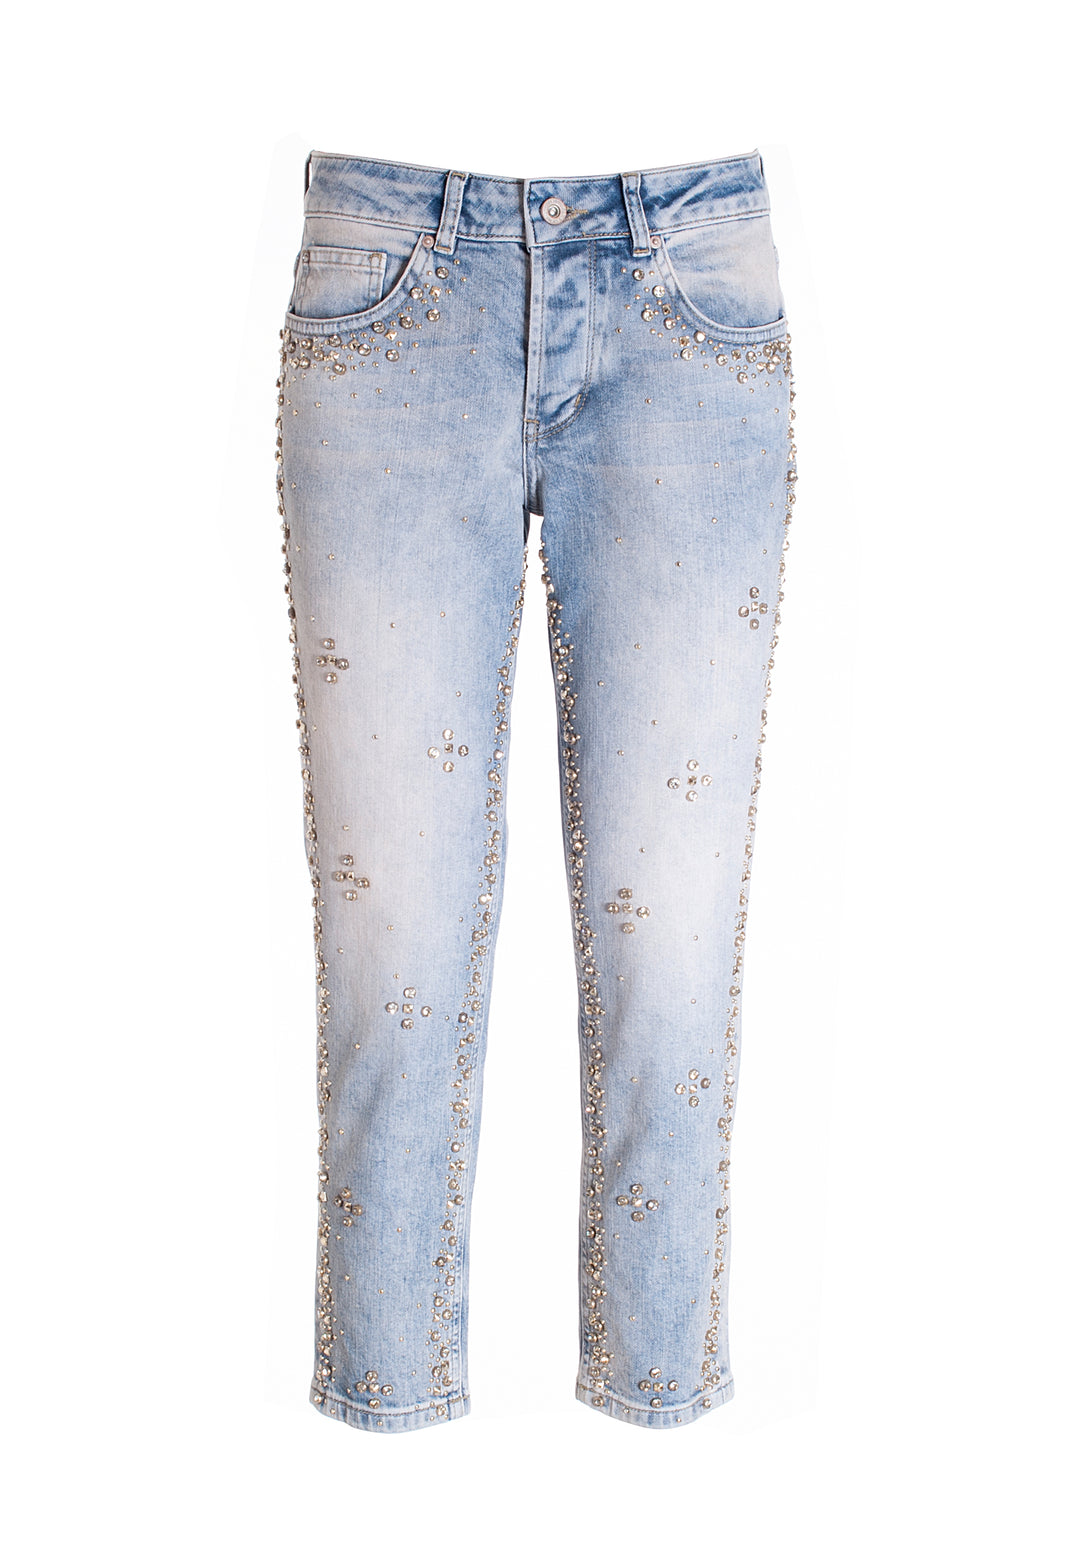 Jeans loose fit cropped made in denim with bleached wash